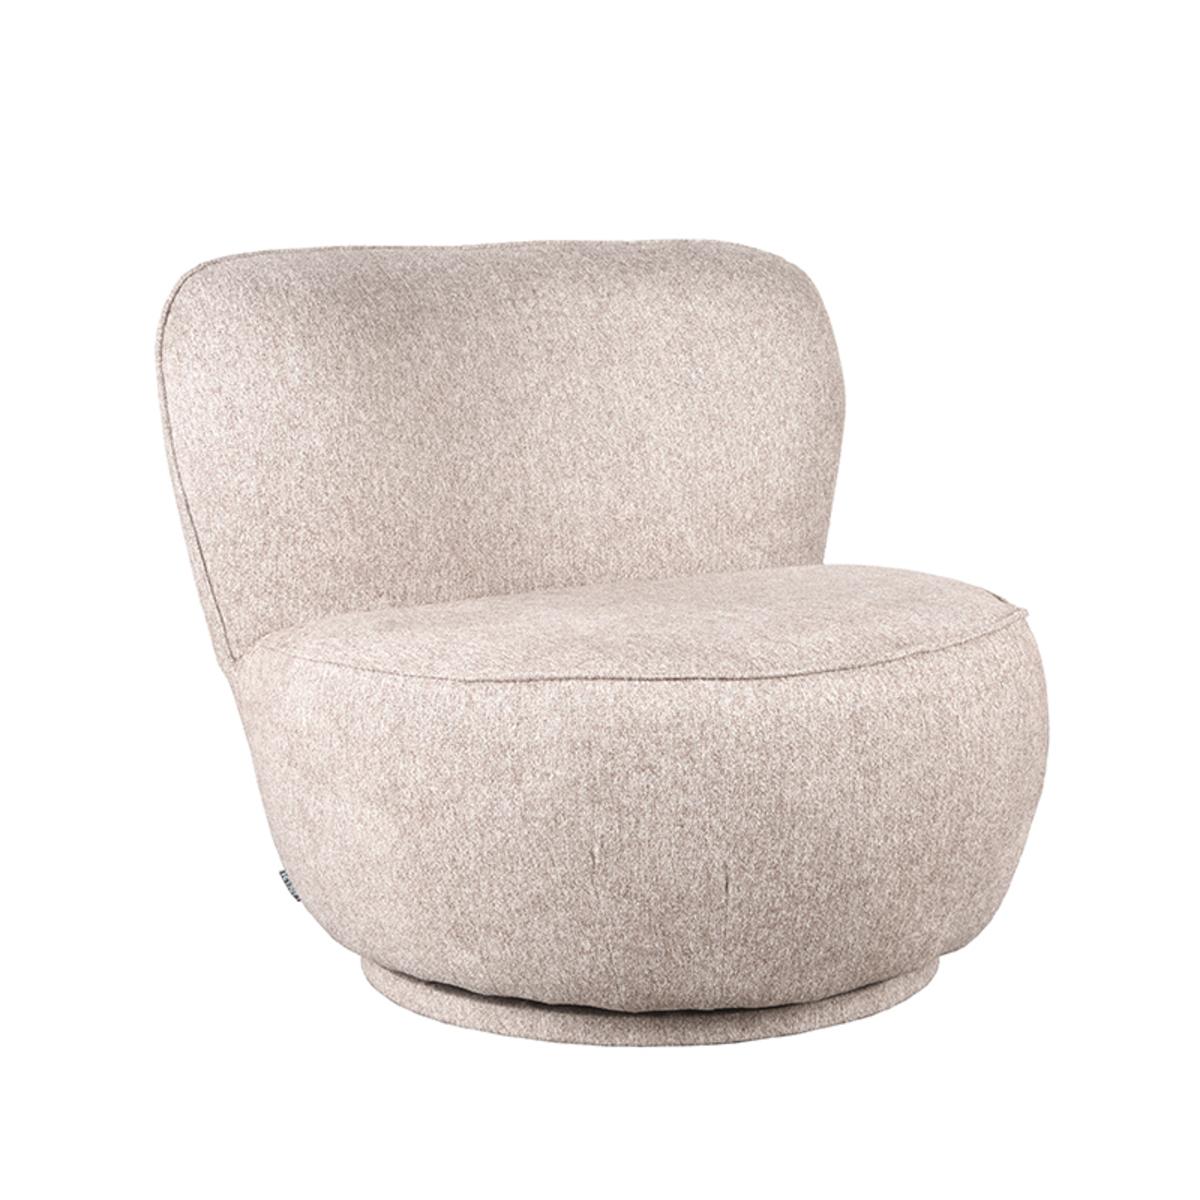  Fauteuil Bunny - Taupe - Amazy afbeelding 1